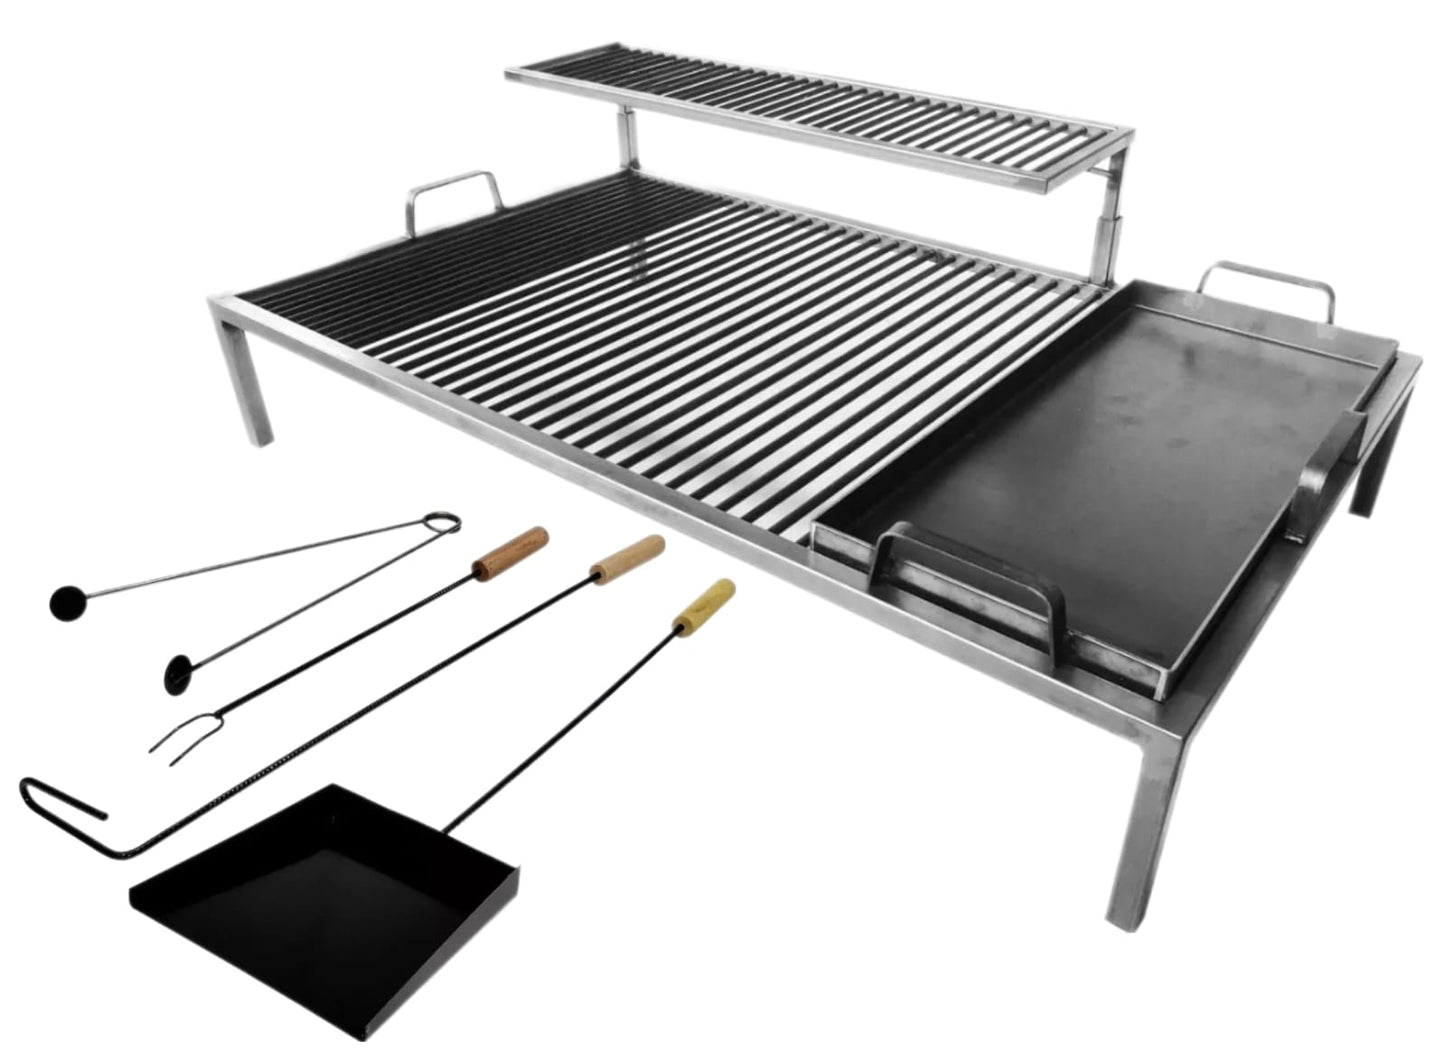 Argentine Iron Grill + FREE BBQ Tool Set - 2 Levels and Griddle